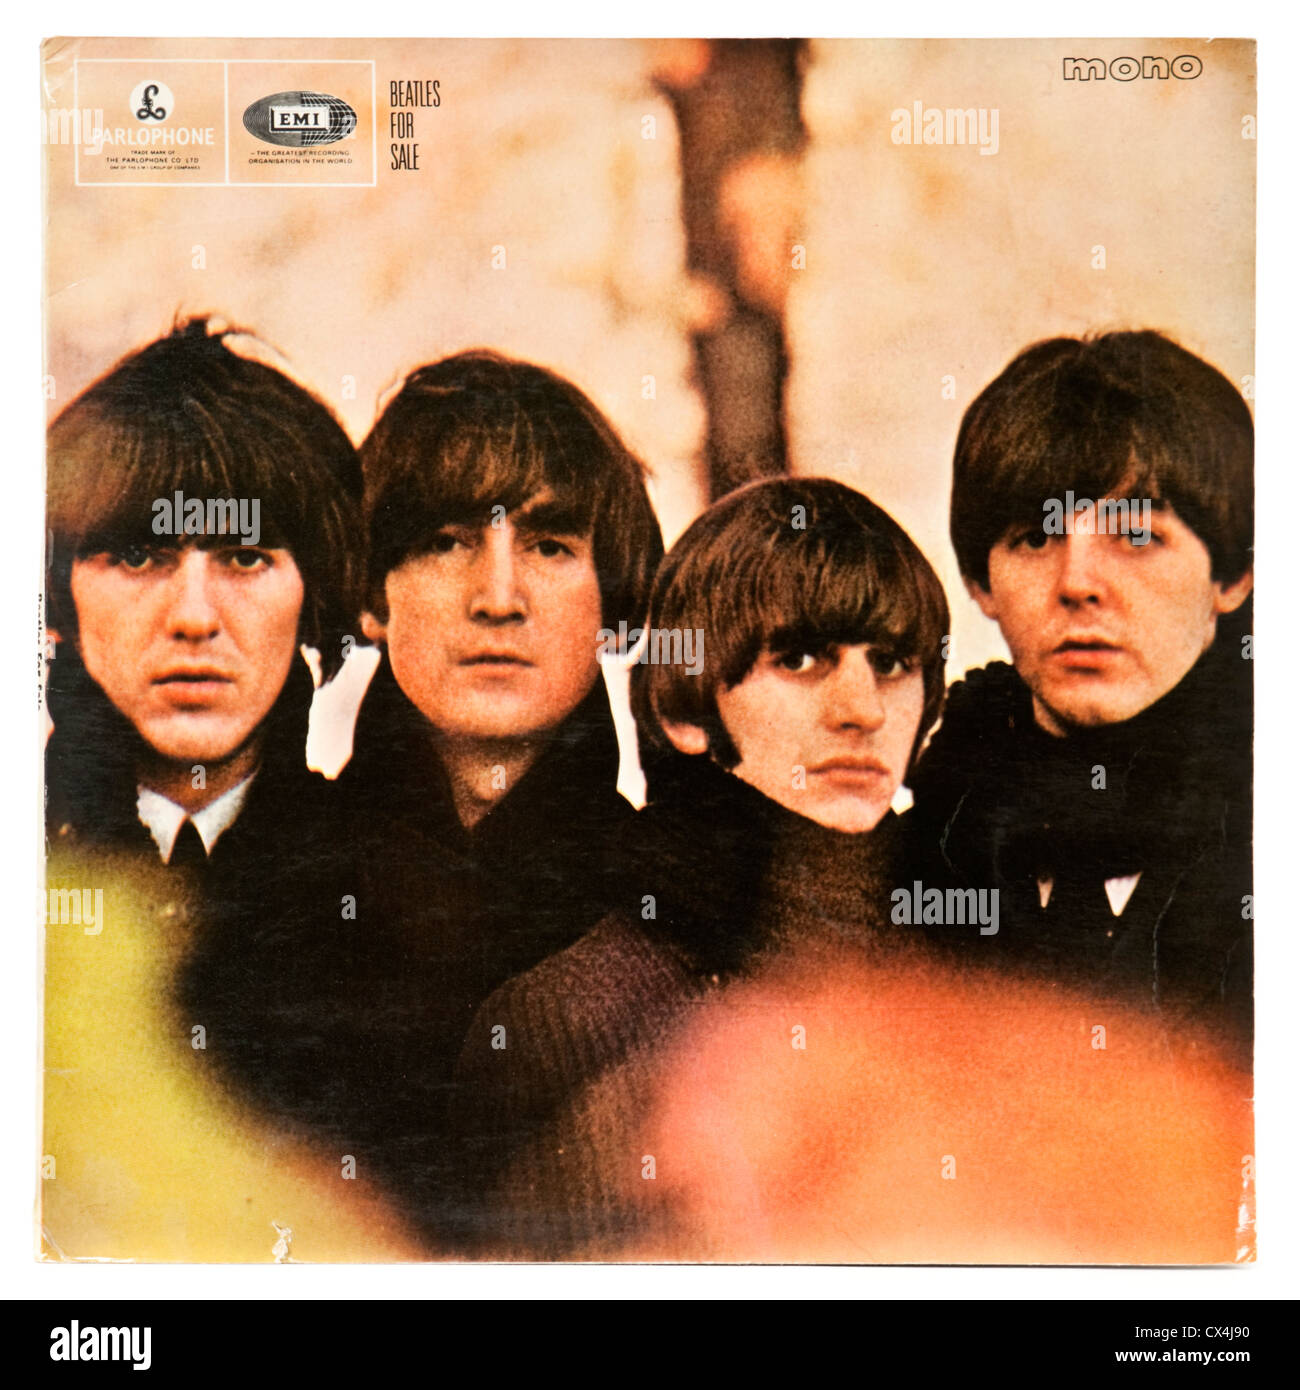 'Beatles For Sale' LP by The Beatles - Original 1964 mono version - First British pressing. EDITORIAL USE ONLY Stock Photo